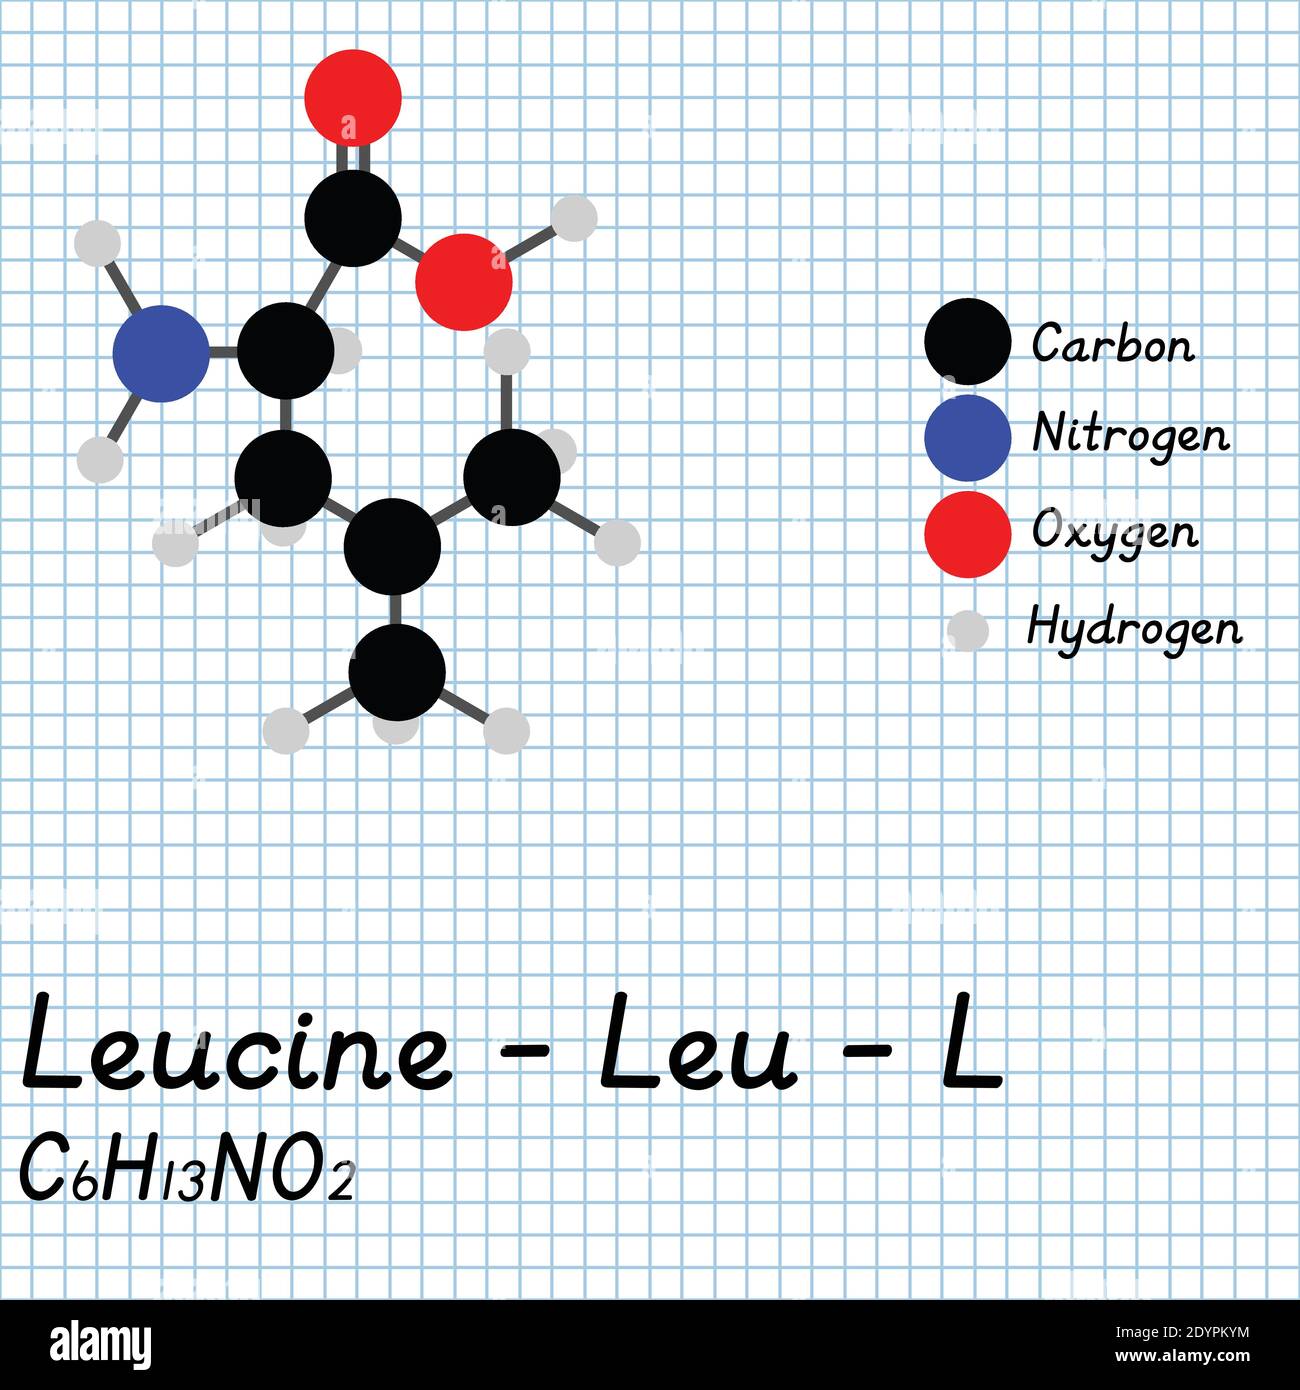 Leucine - Leu - L Amino Acid molecular formula and chemical structure . 2D Ball and stick model on school paper sheet background. EPS10 Stock Vector